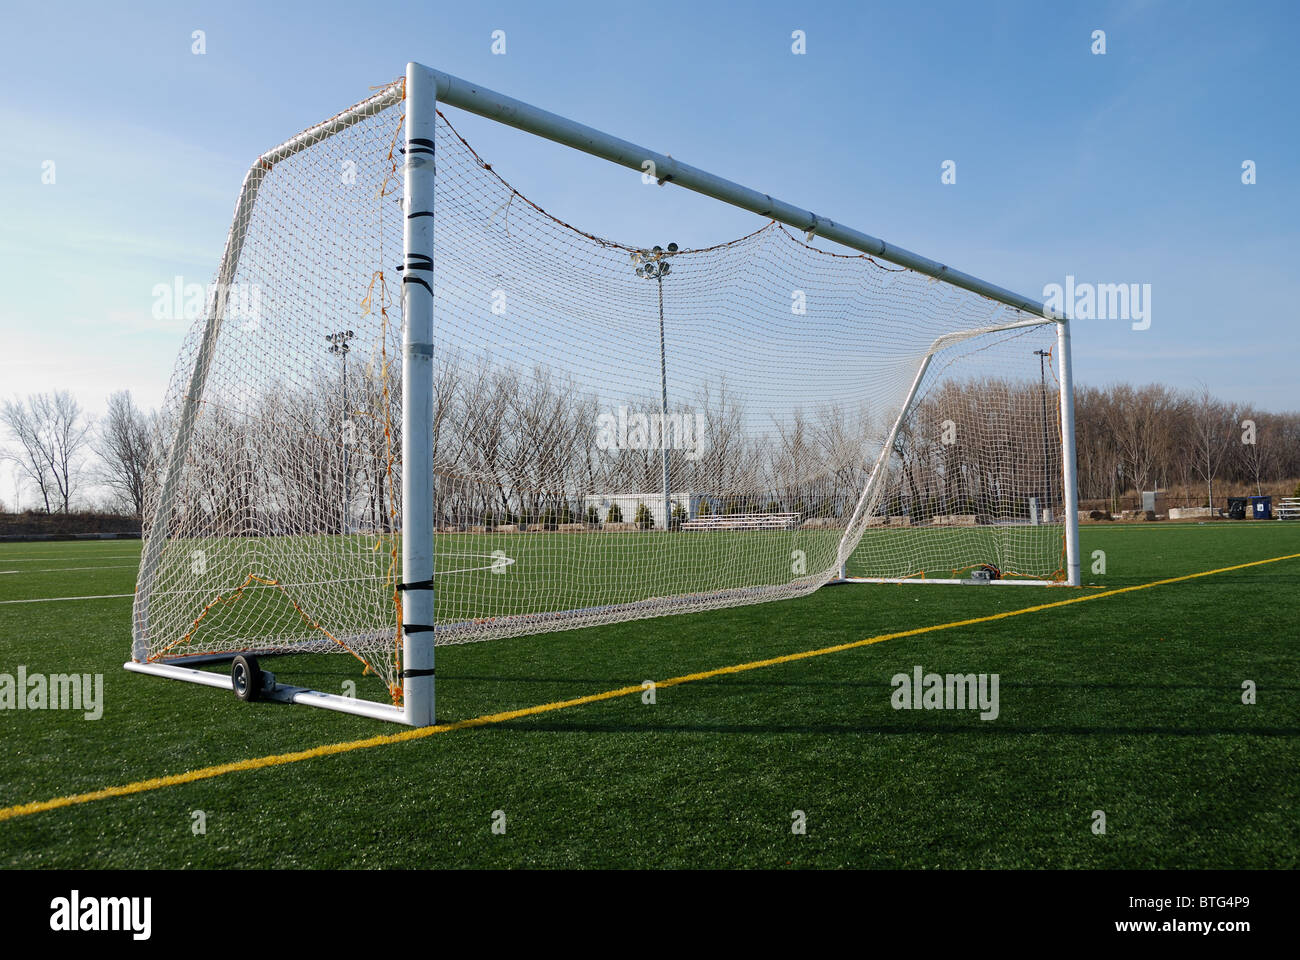 Wheeled mobile goalposts and net on a soccer pitch in Toronto Ontario Canada Stock Photo